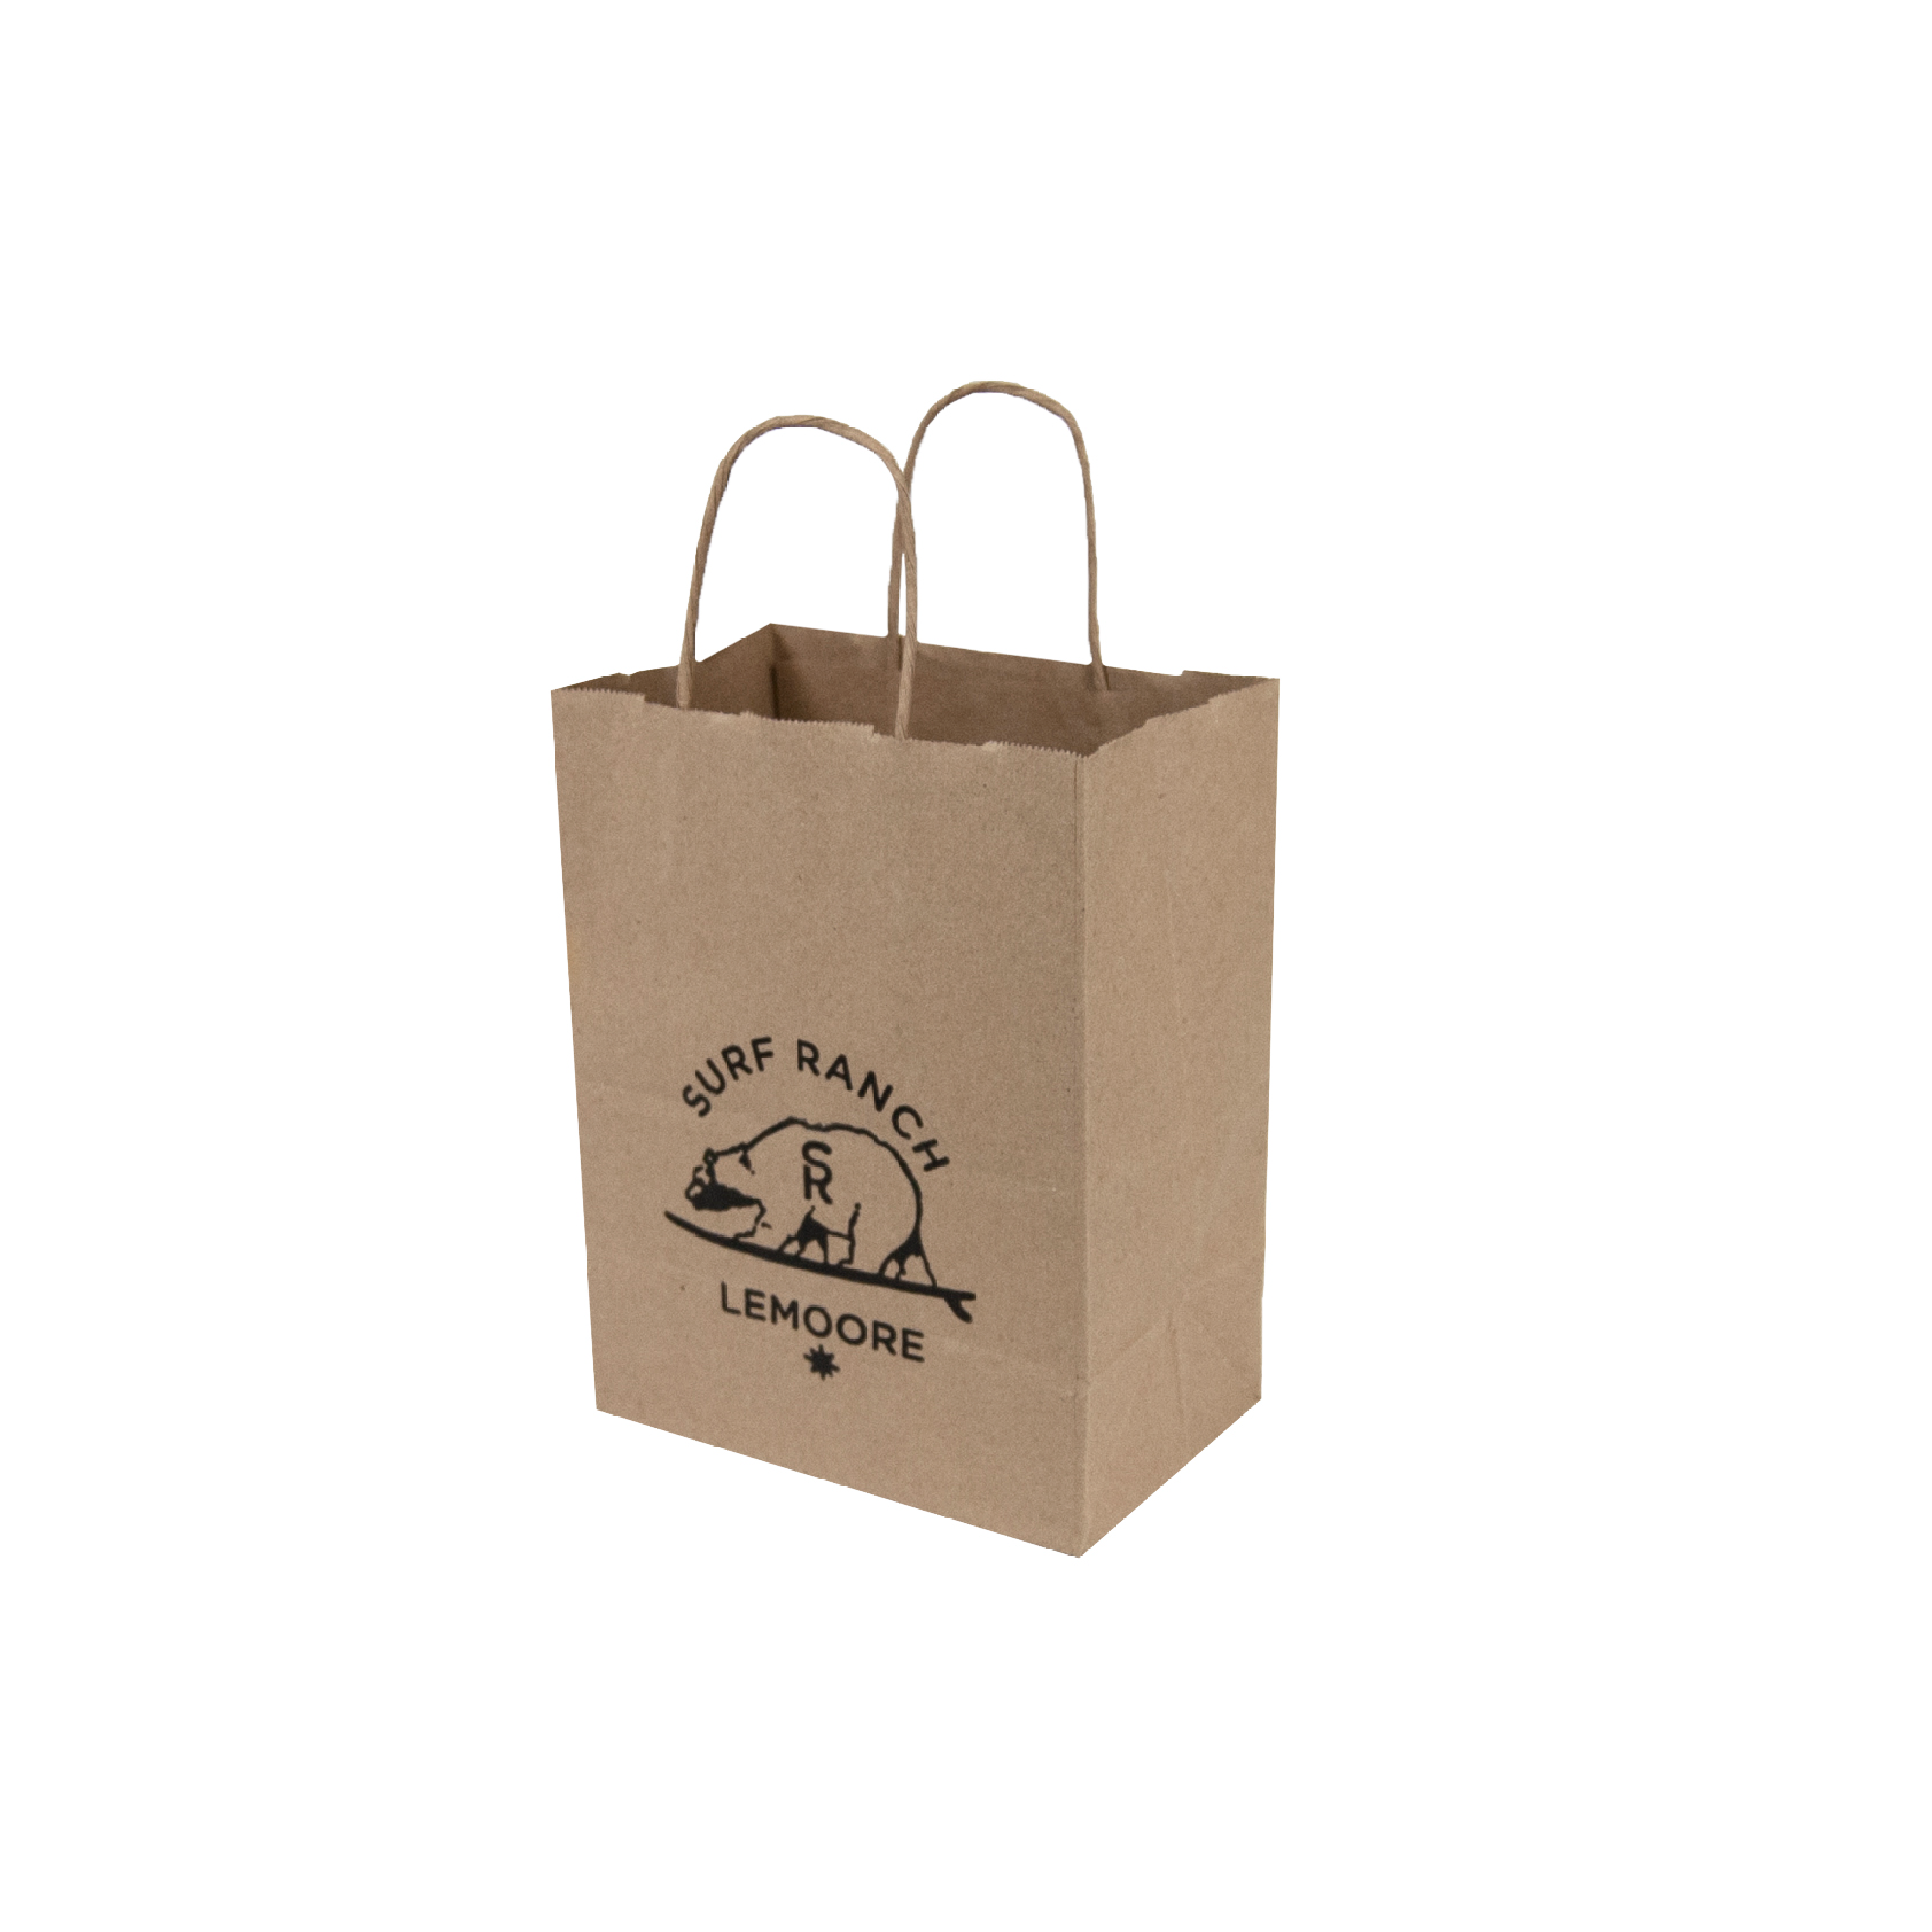 Buy Paper Shopping Bags White 16x6x19 Online